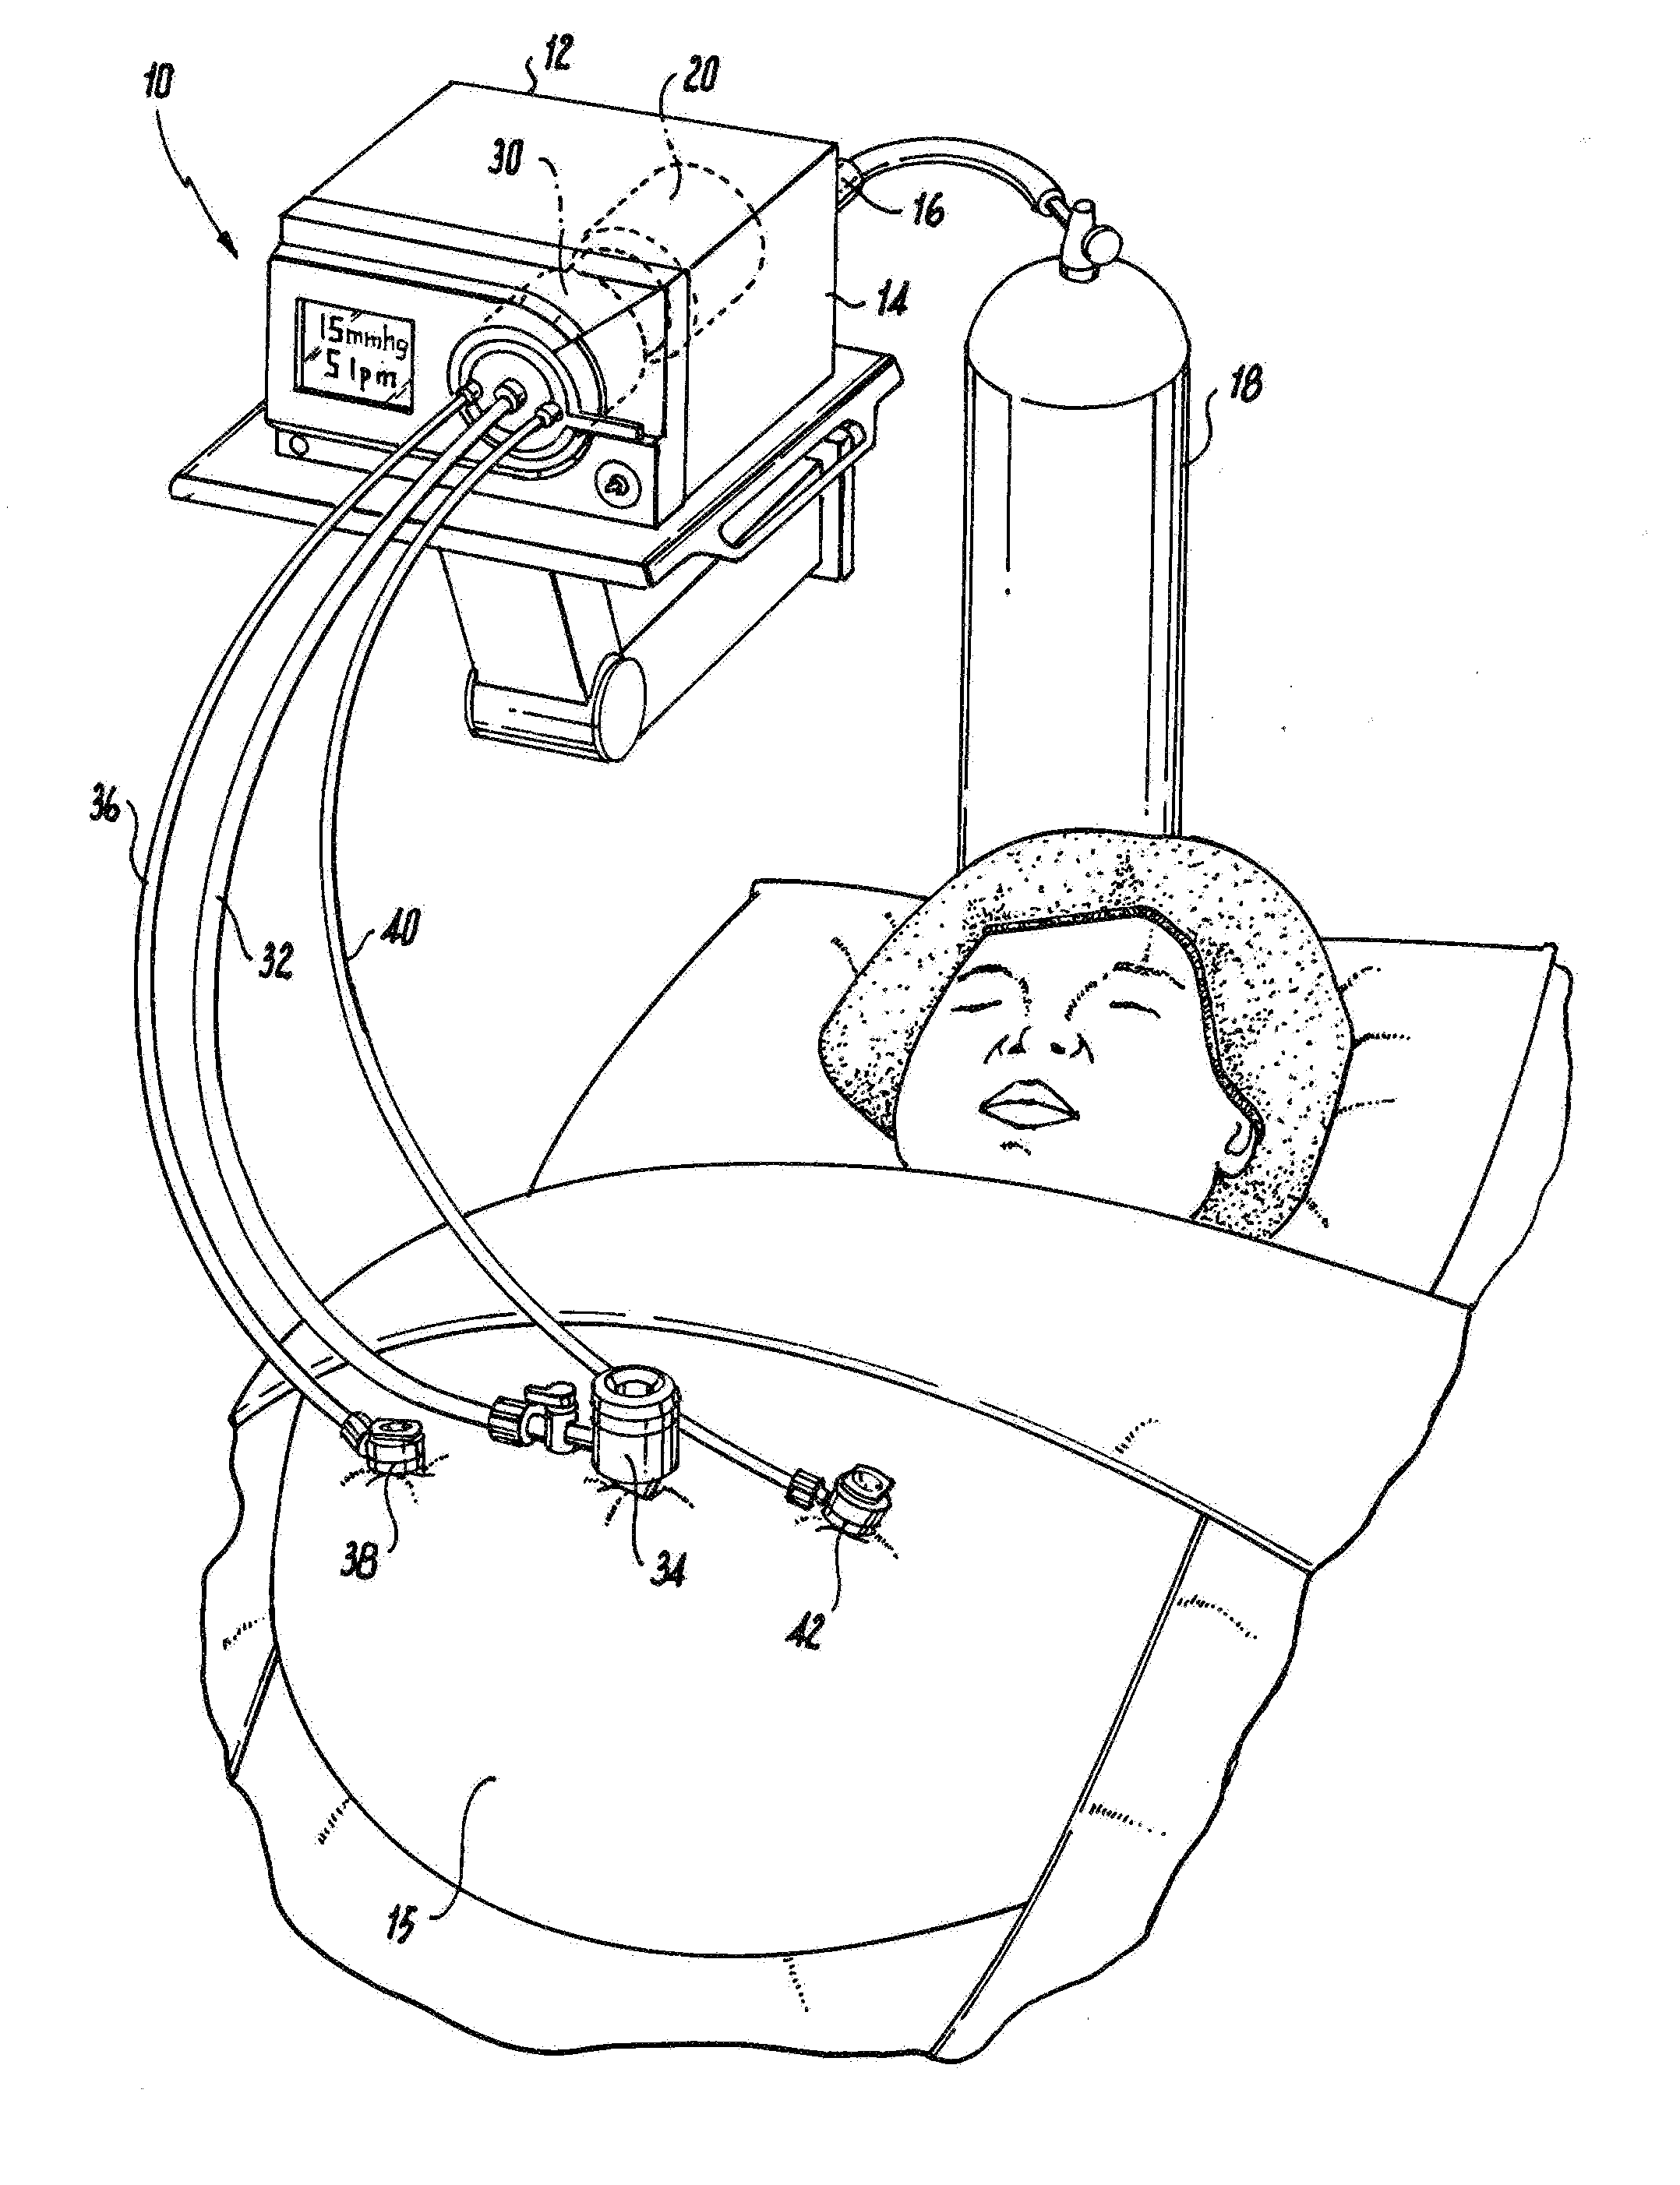 Filter cartridge with internal gaseous seal for multimodal surgical gas delivery system having a smoke evacuation mode